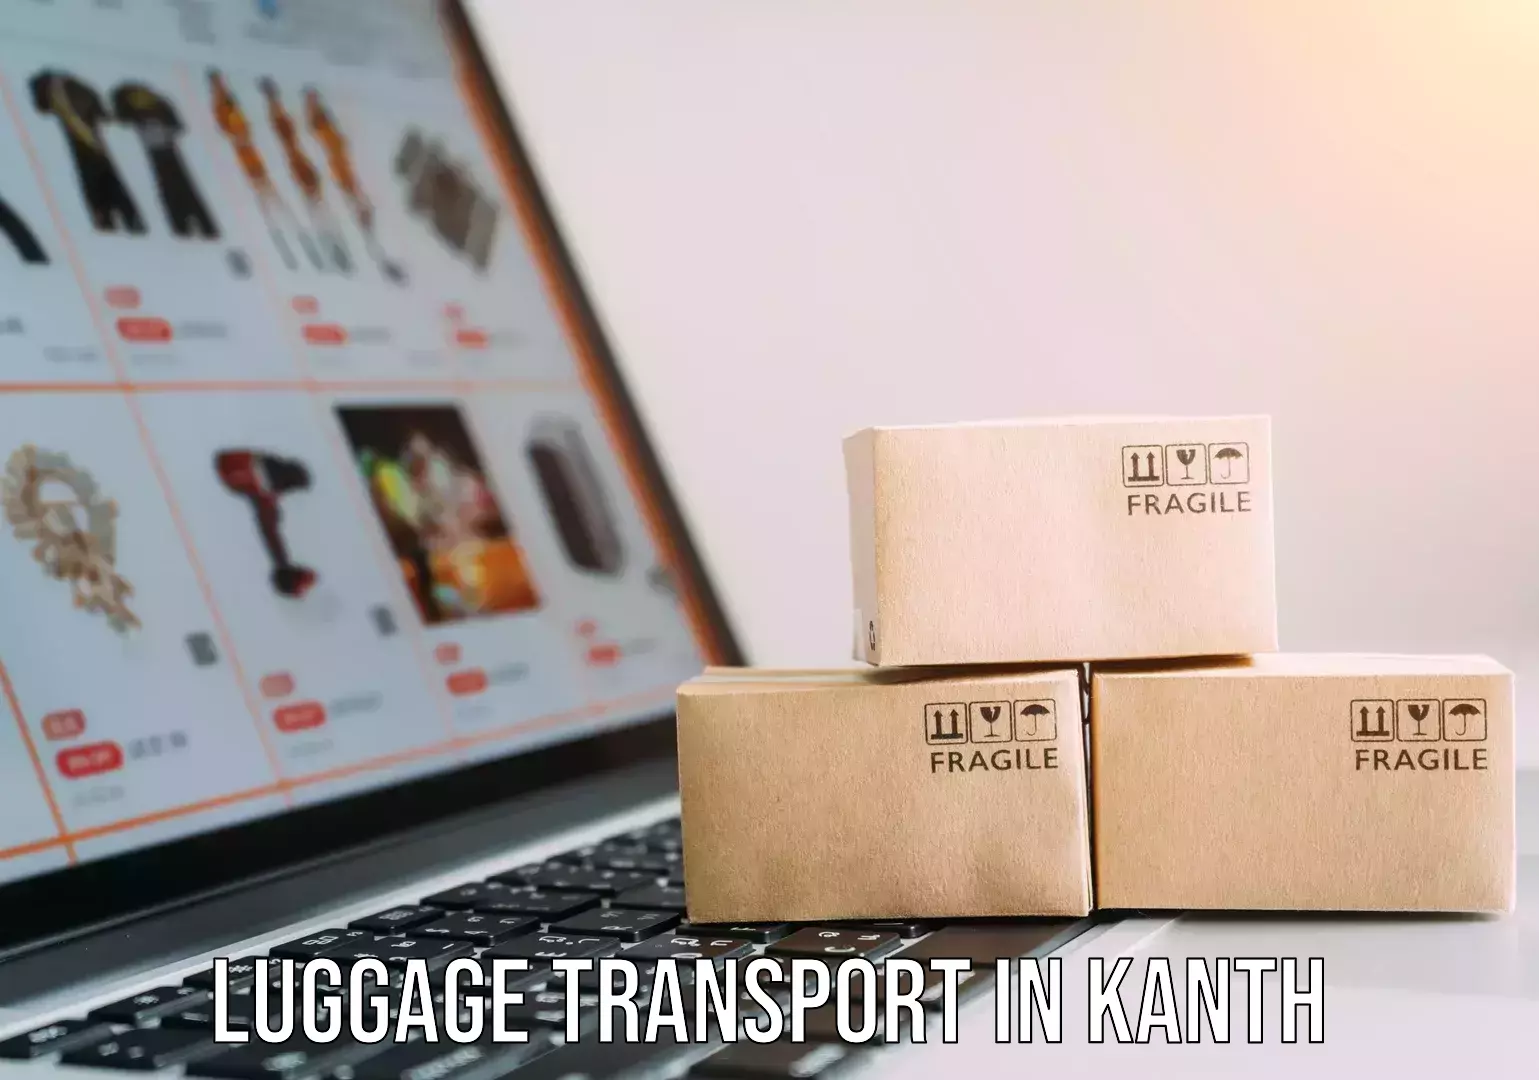 Luggage transport operations in Kanth